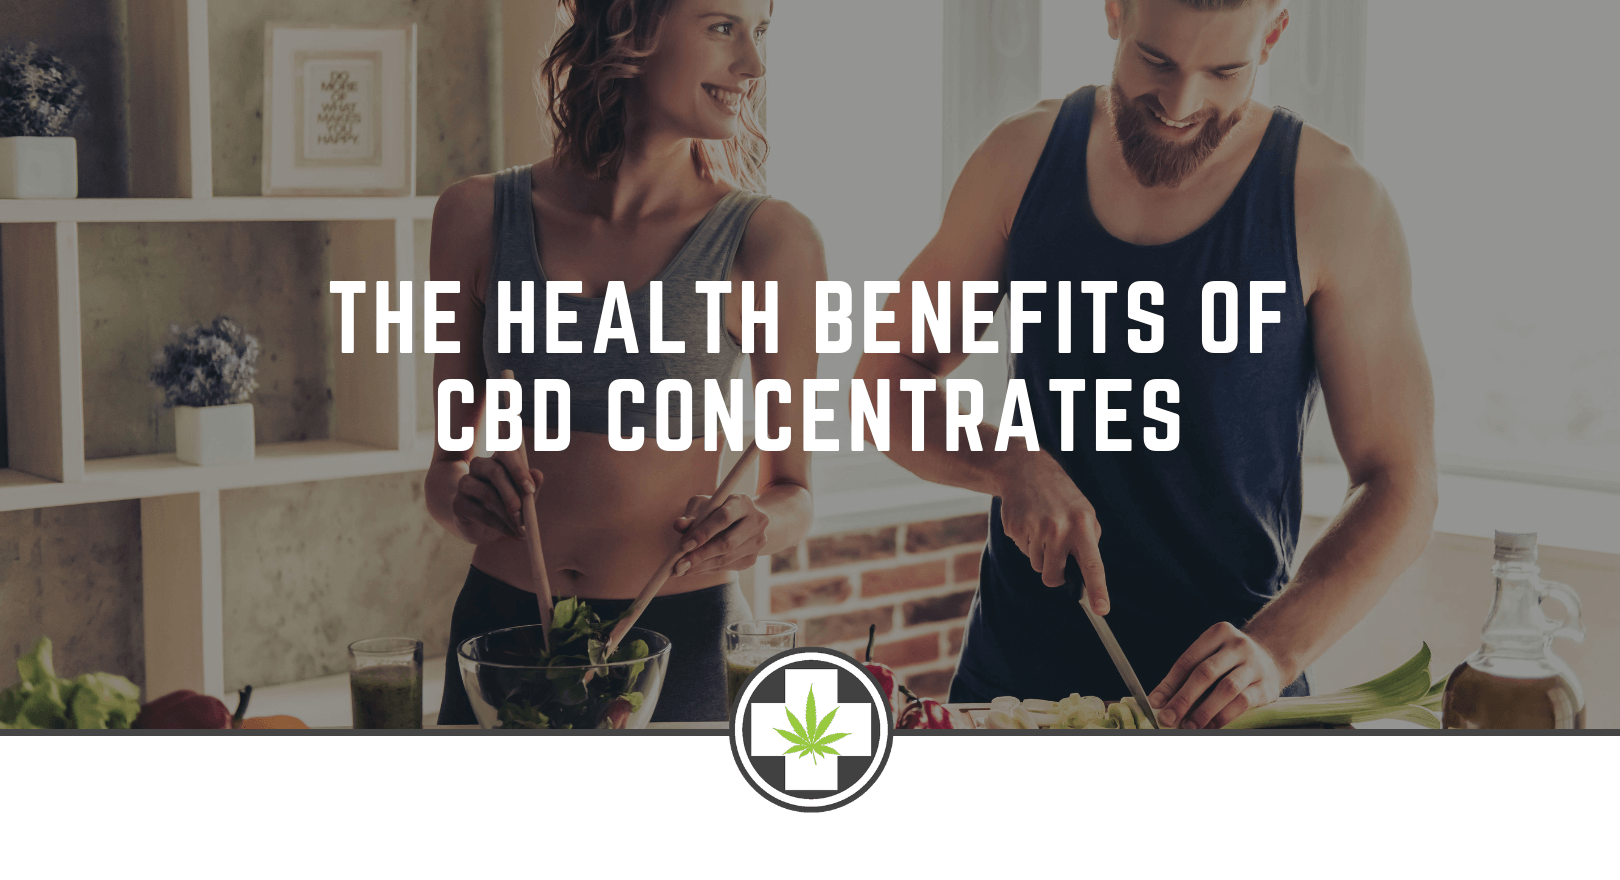 The Health Benefits of CBD Concentrates